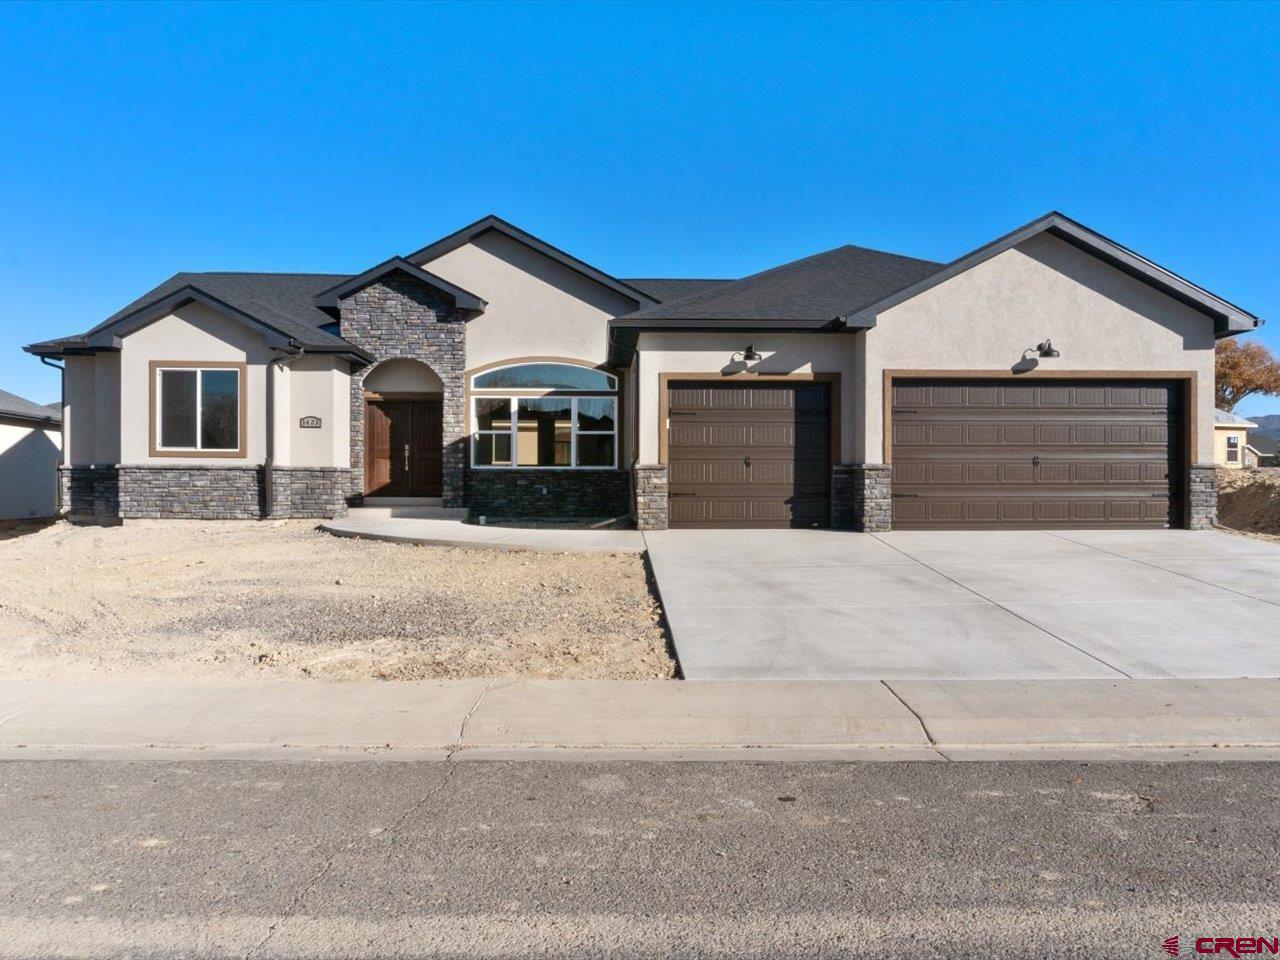 New Home Just completed. Ready to move in. Ranch style home. 4 bedrooms, 3 full baths, 3 car attached garage. covered patio. ceiling fans in all bedrooms, as well in living room. Open floor plan.